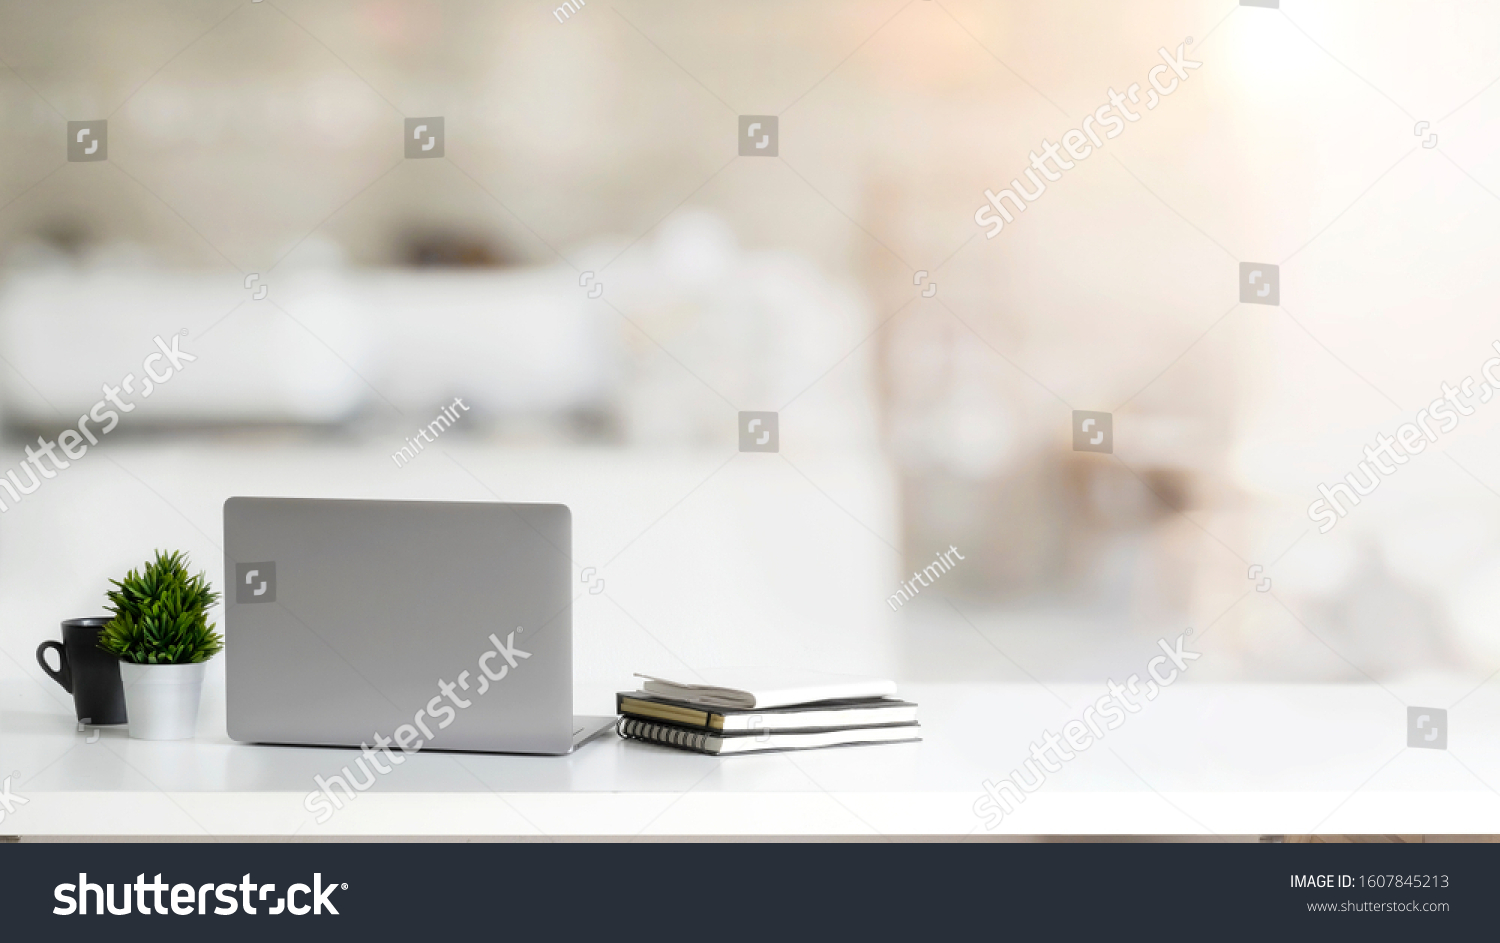 Close up view of simple workspace with laptop, notebooks, coffee cup and tree pot on white table with blurred office room background #1607845213